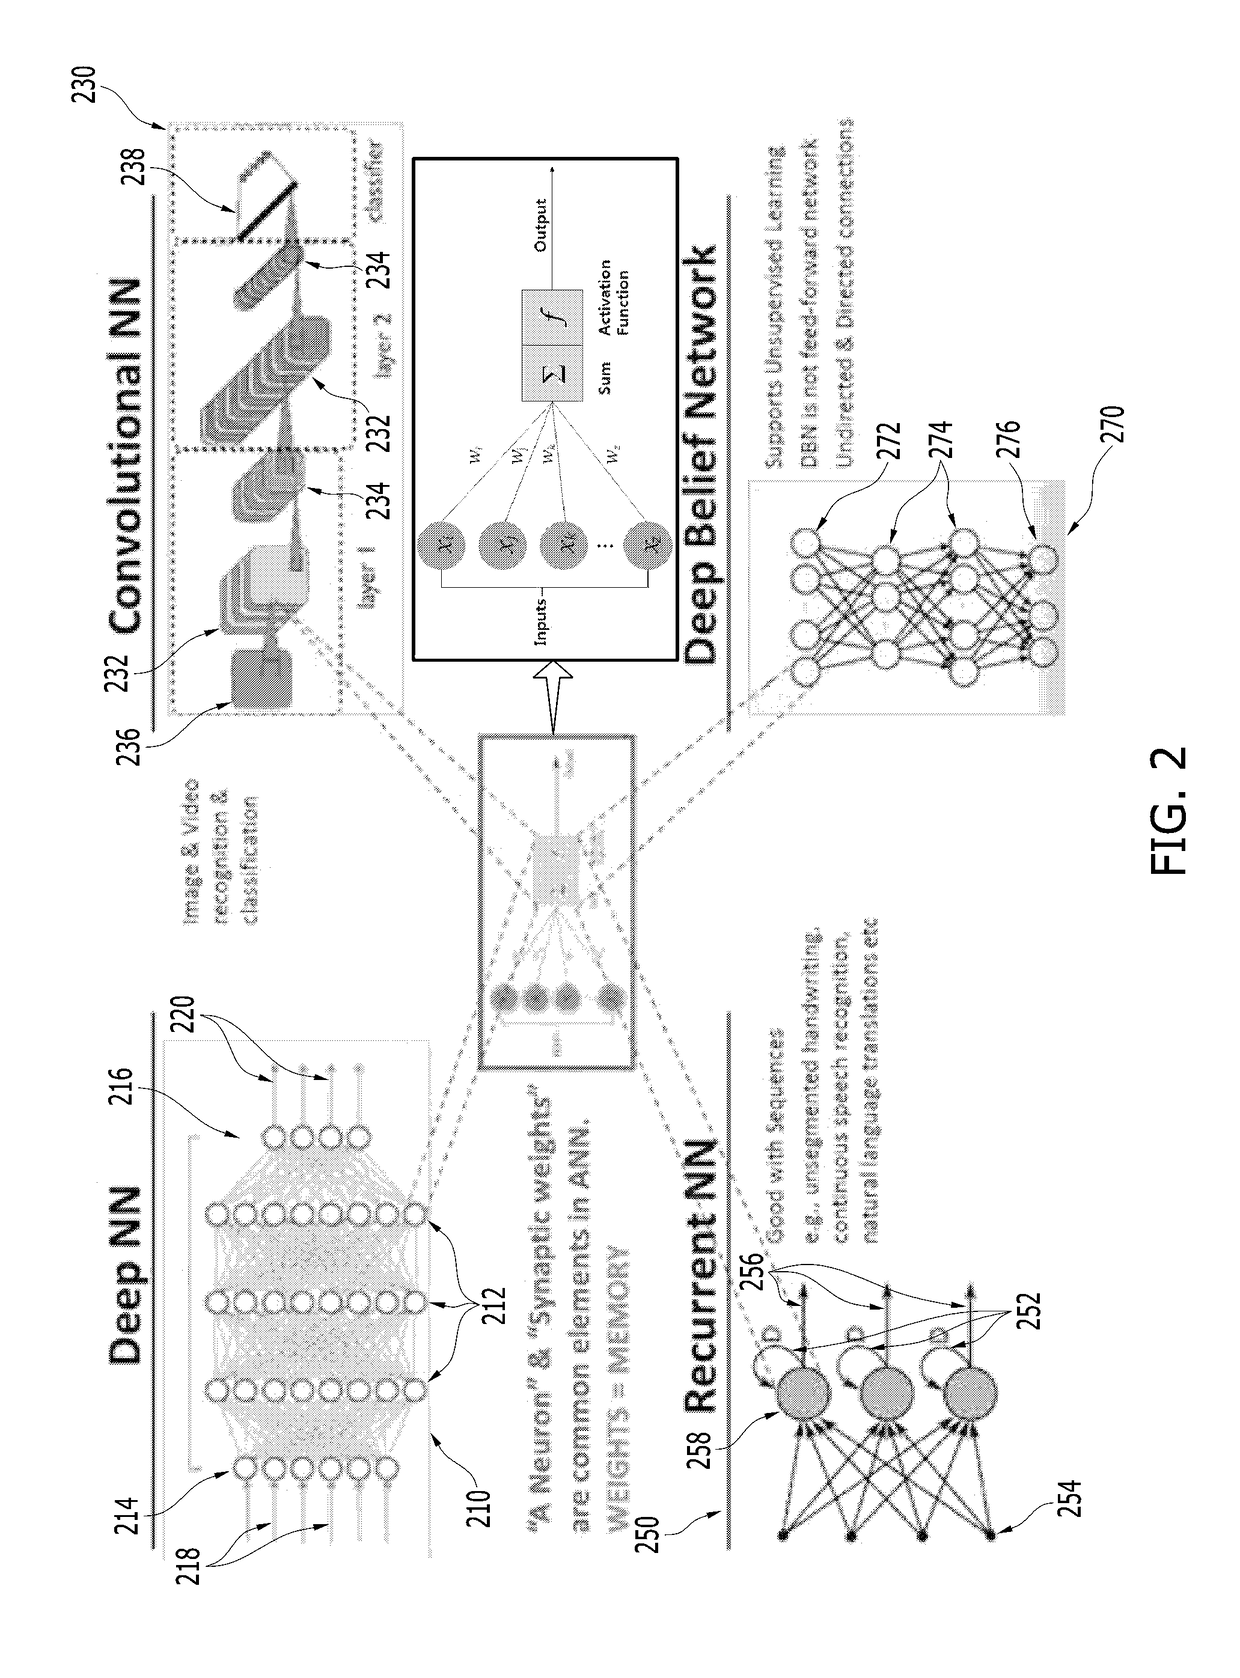 Neural network hardware accelerator architectures and operating method thereof